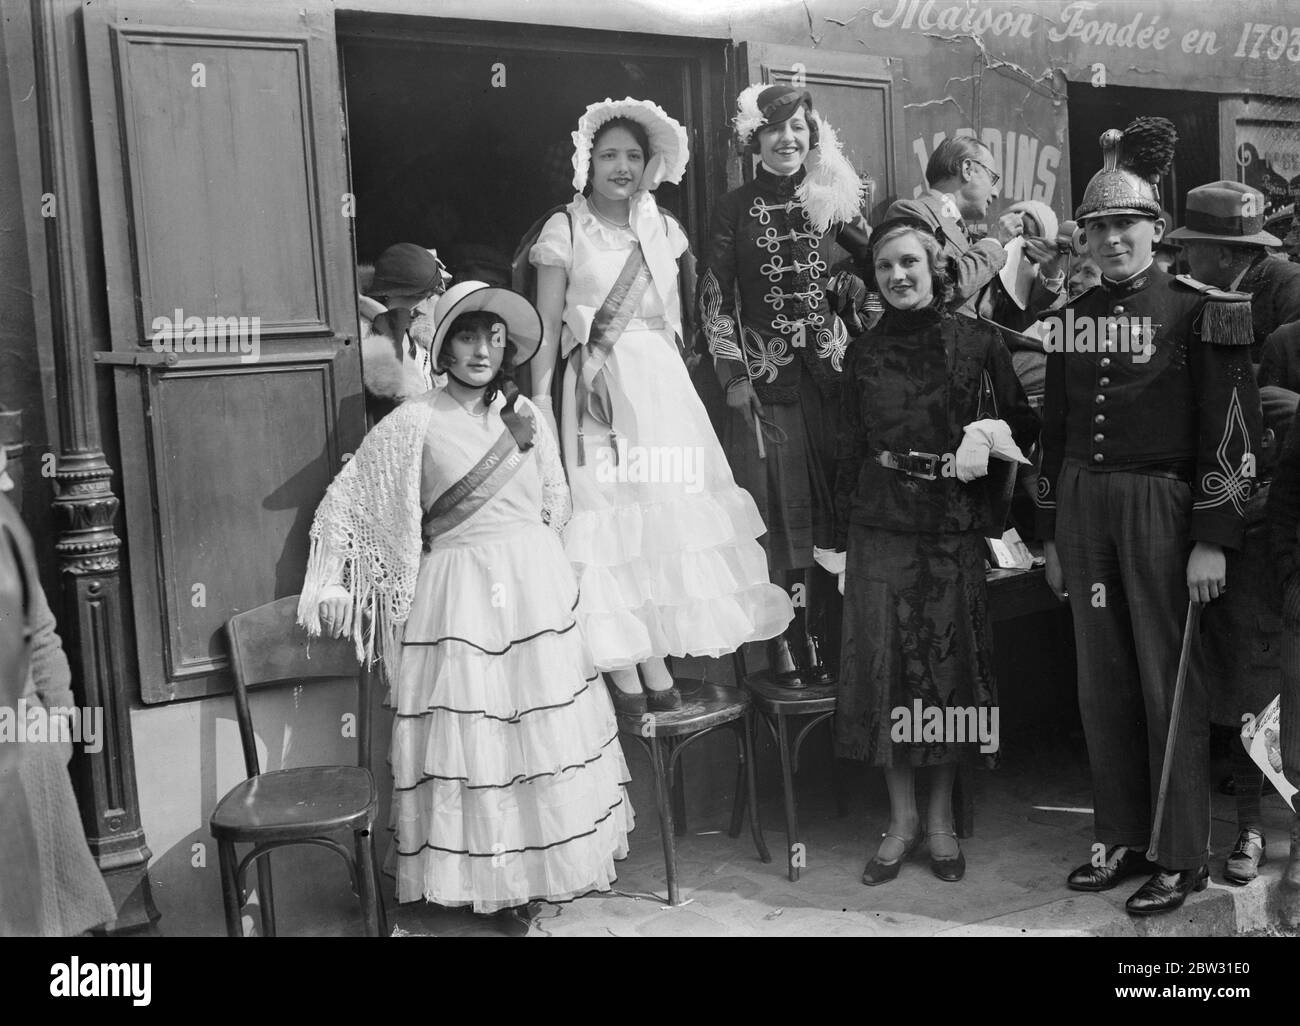 Crinoline fashions at Montmartre bicycle race . Crinoline fashions worn by sightseers at the Paris Newspaper boys bicycle race round Paris . 20 March 1932 Stock Photo